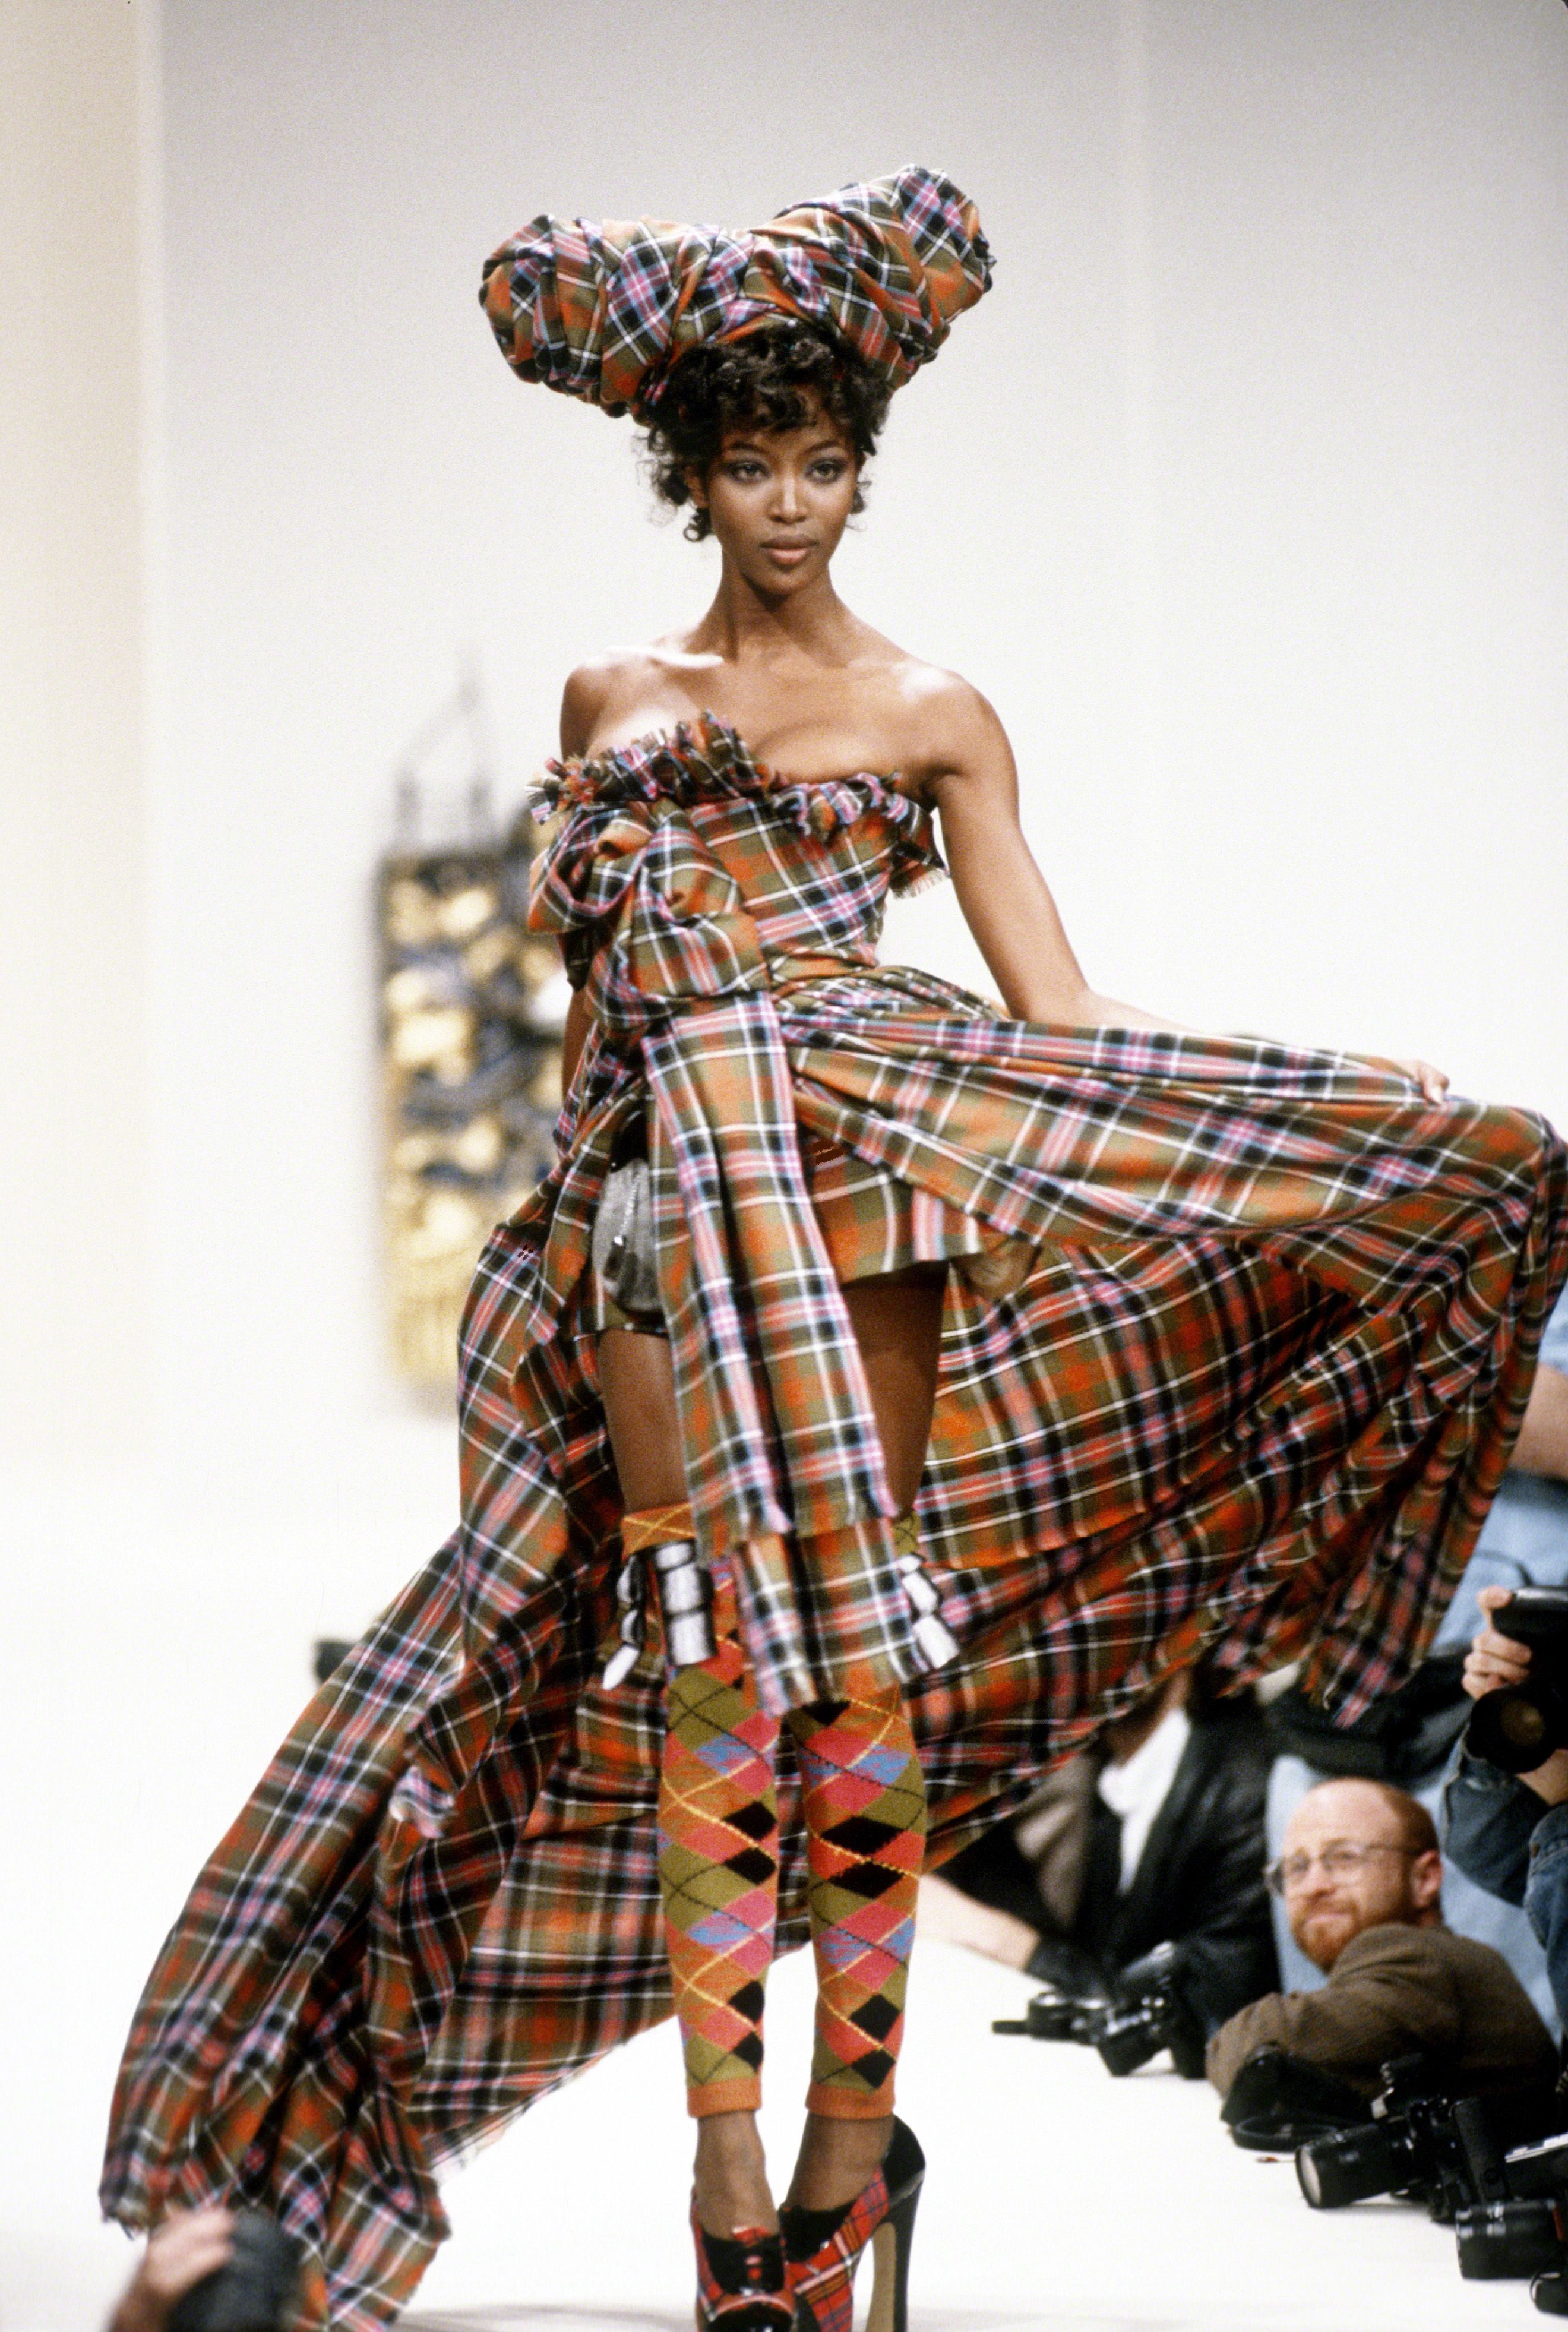 Vivienne Westwood's most iconic designs from her illustrious career